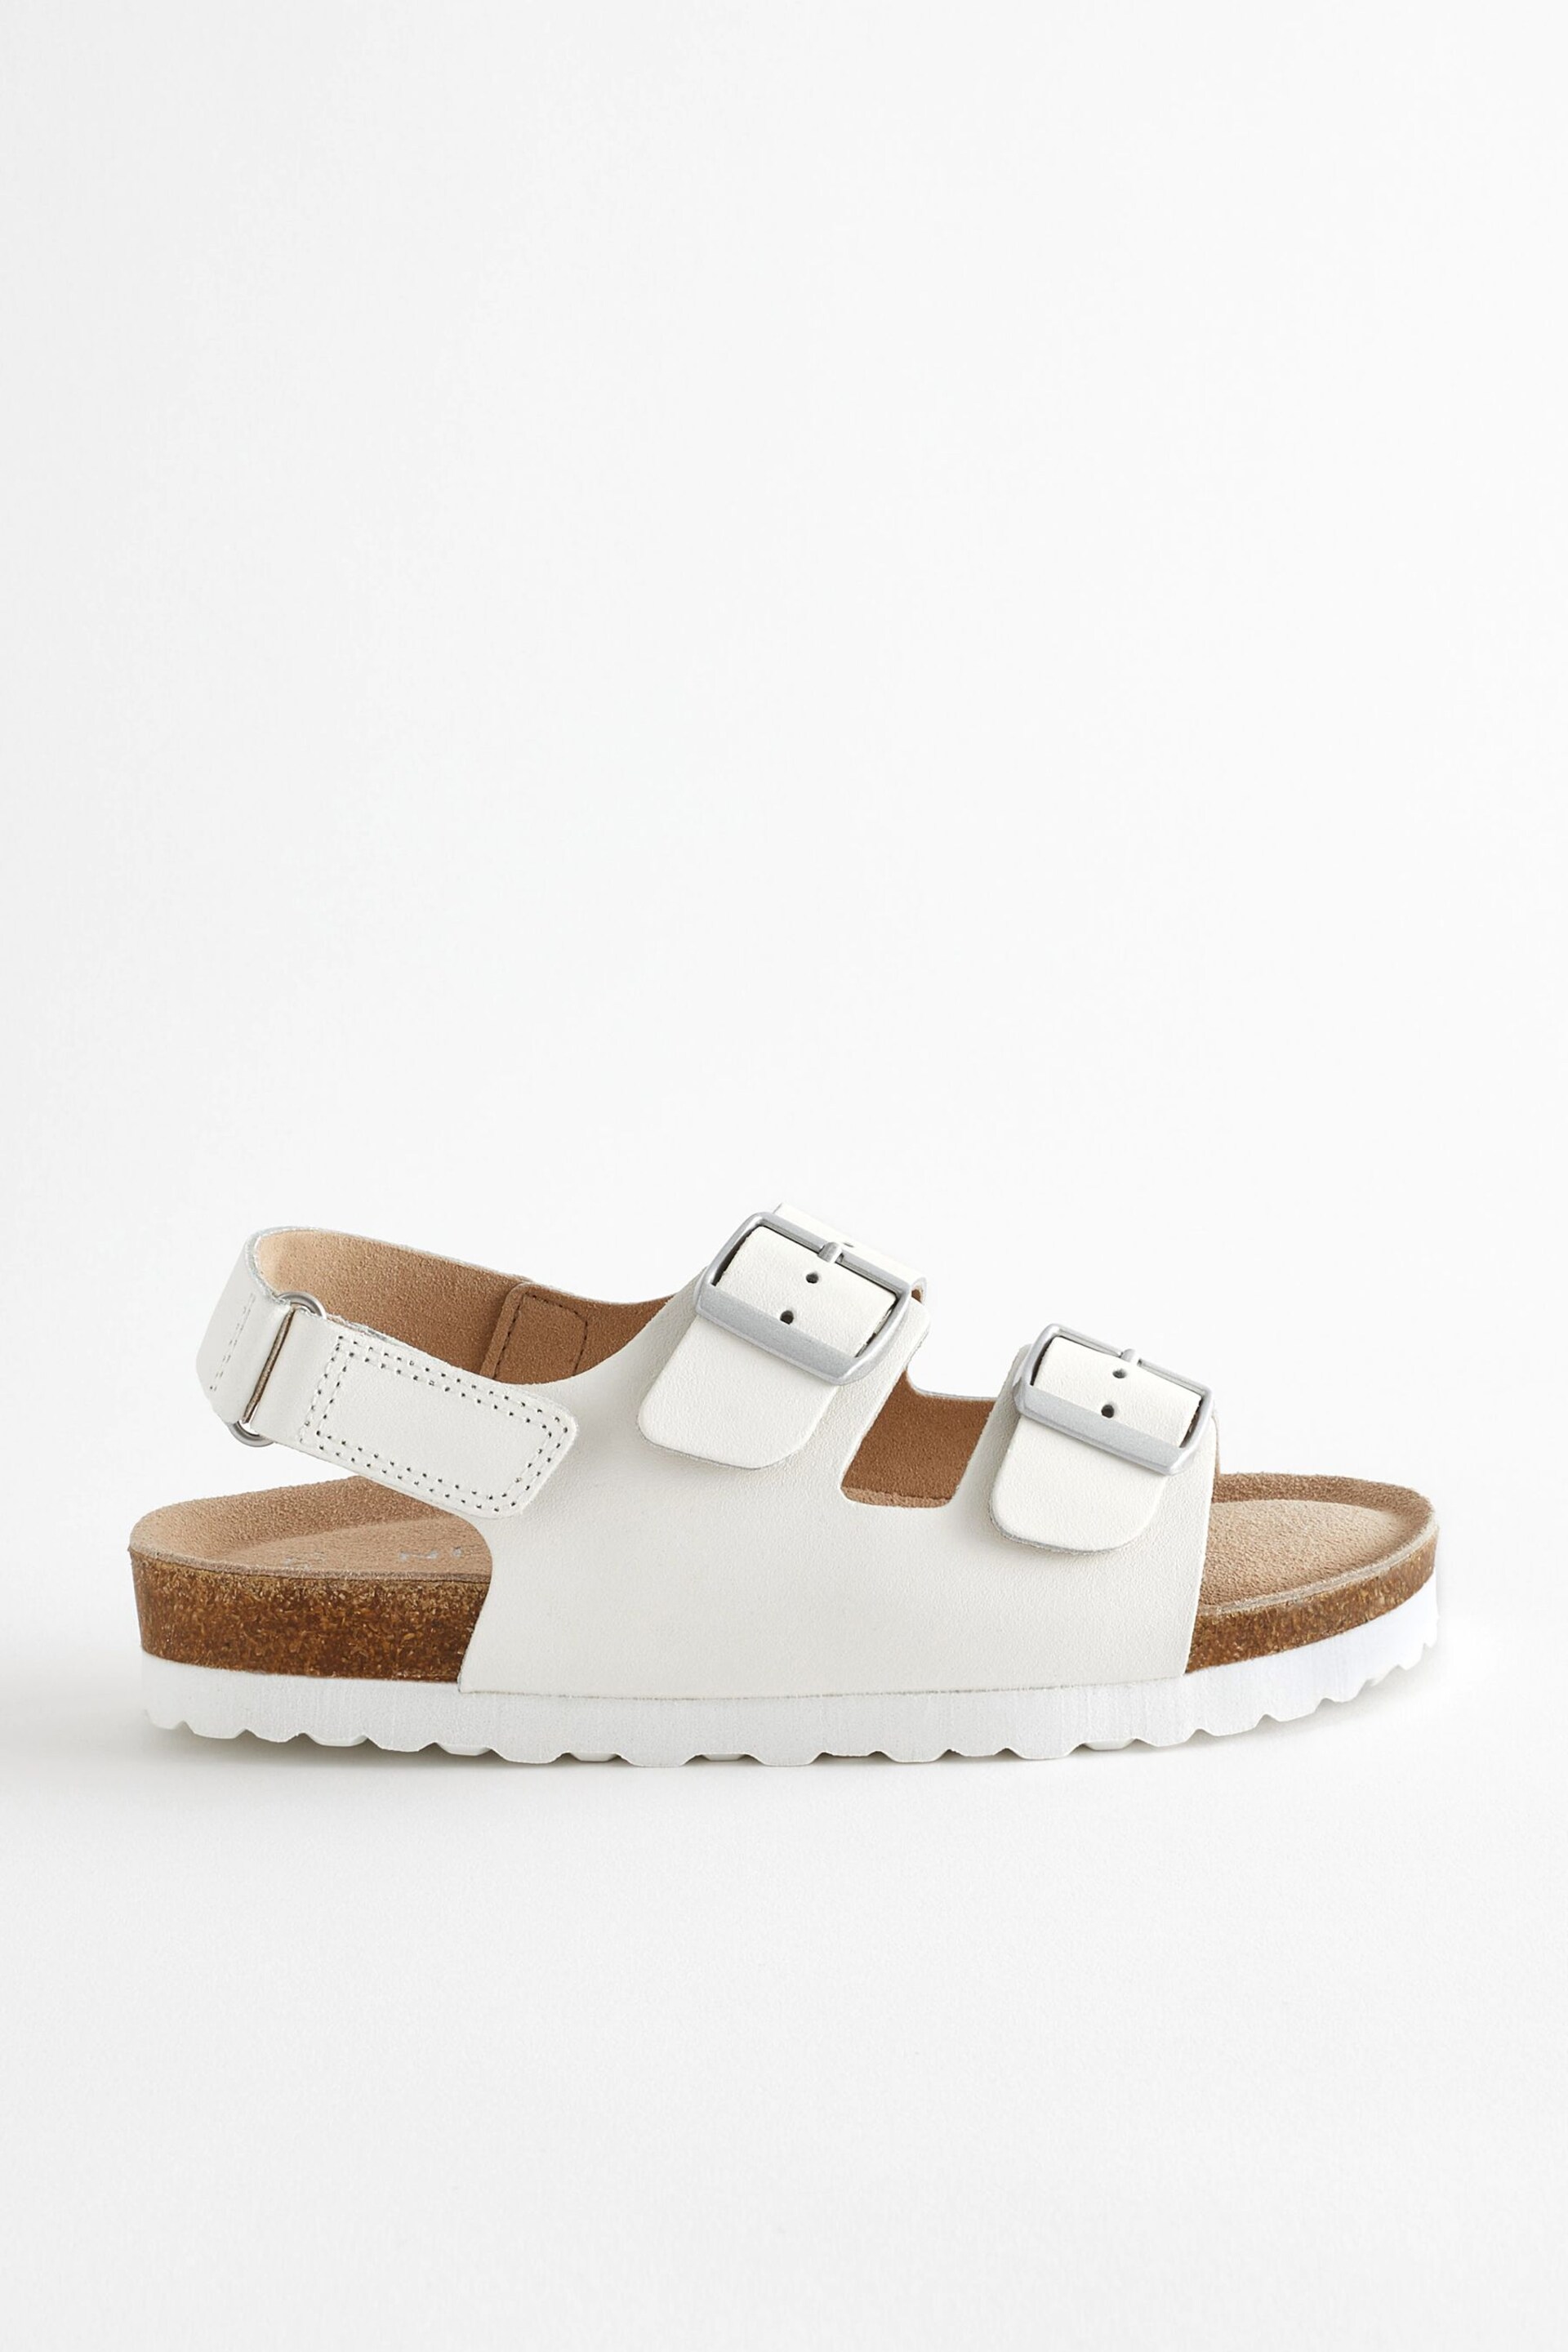 White Leather Standard Fit (F) Two Strap Corkbed Sandals - Image 5 of 9